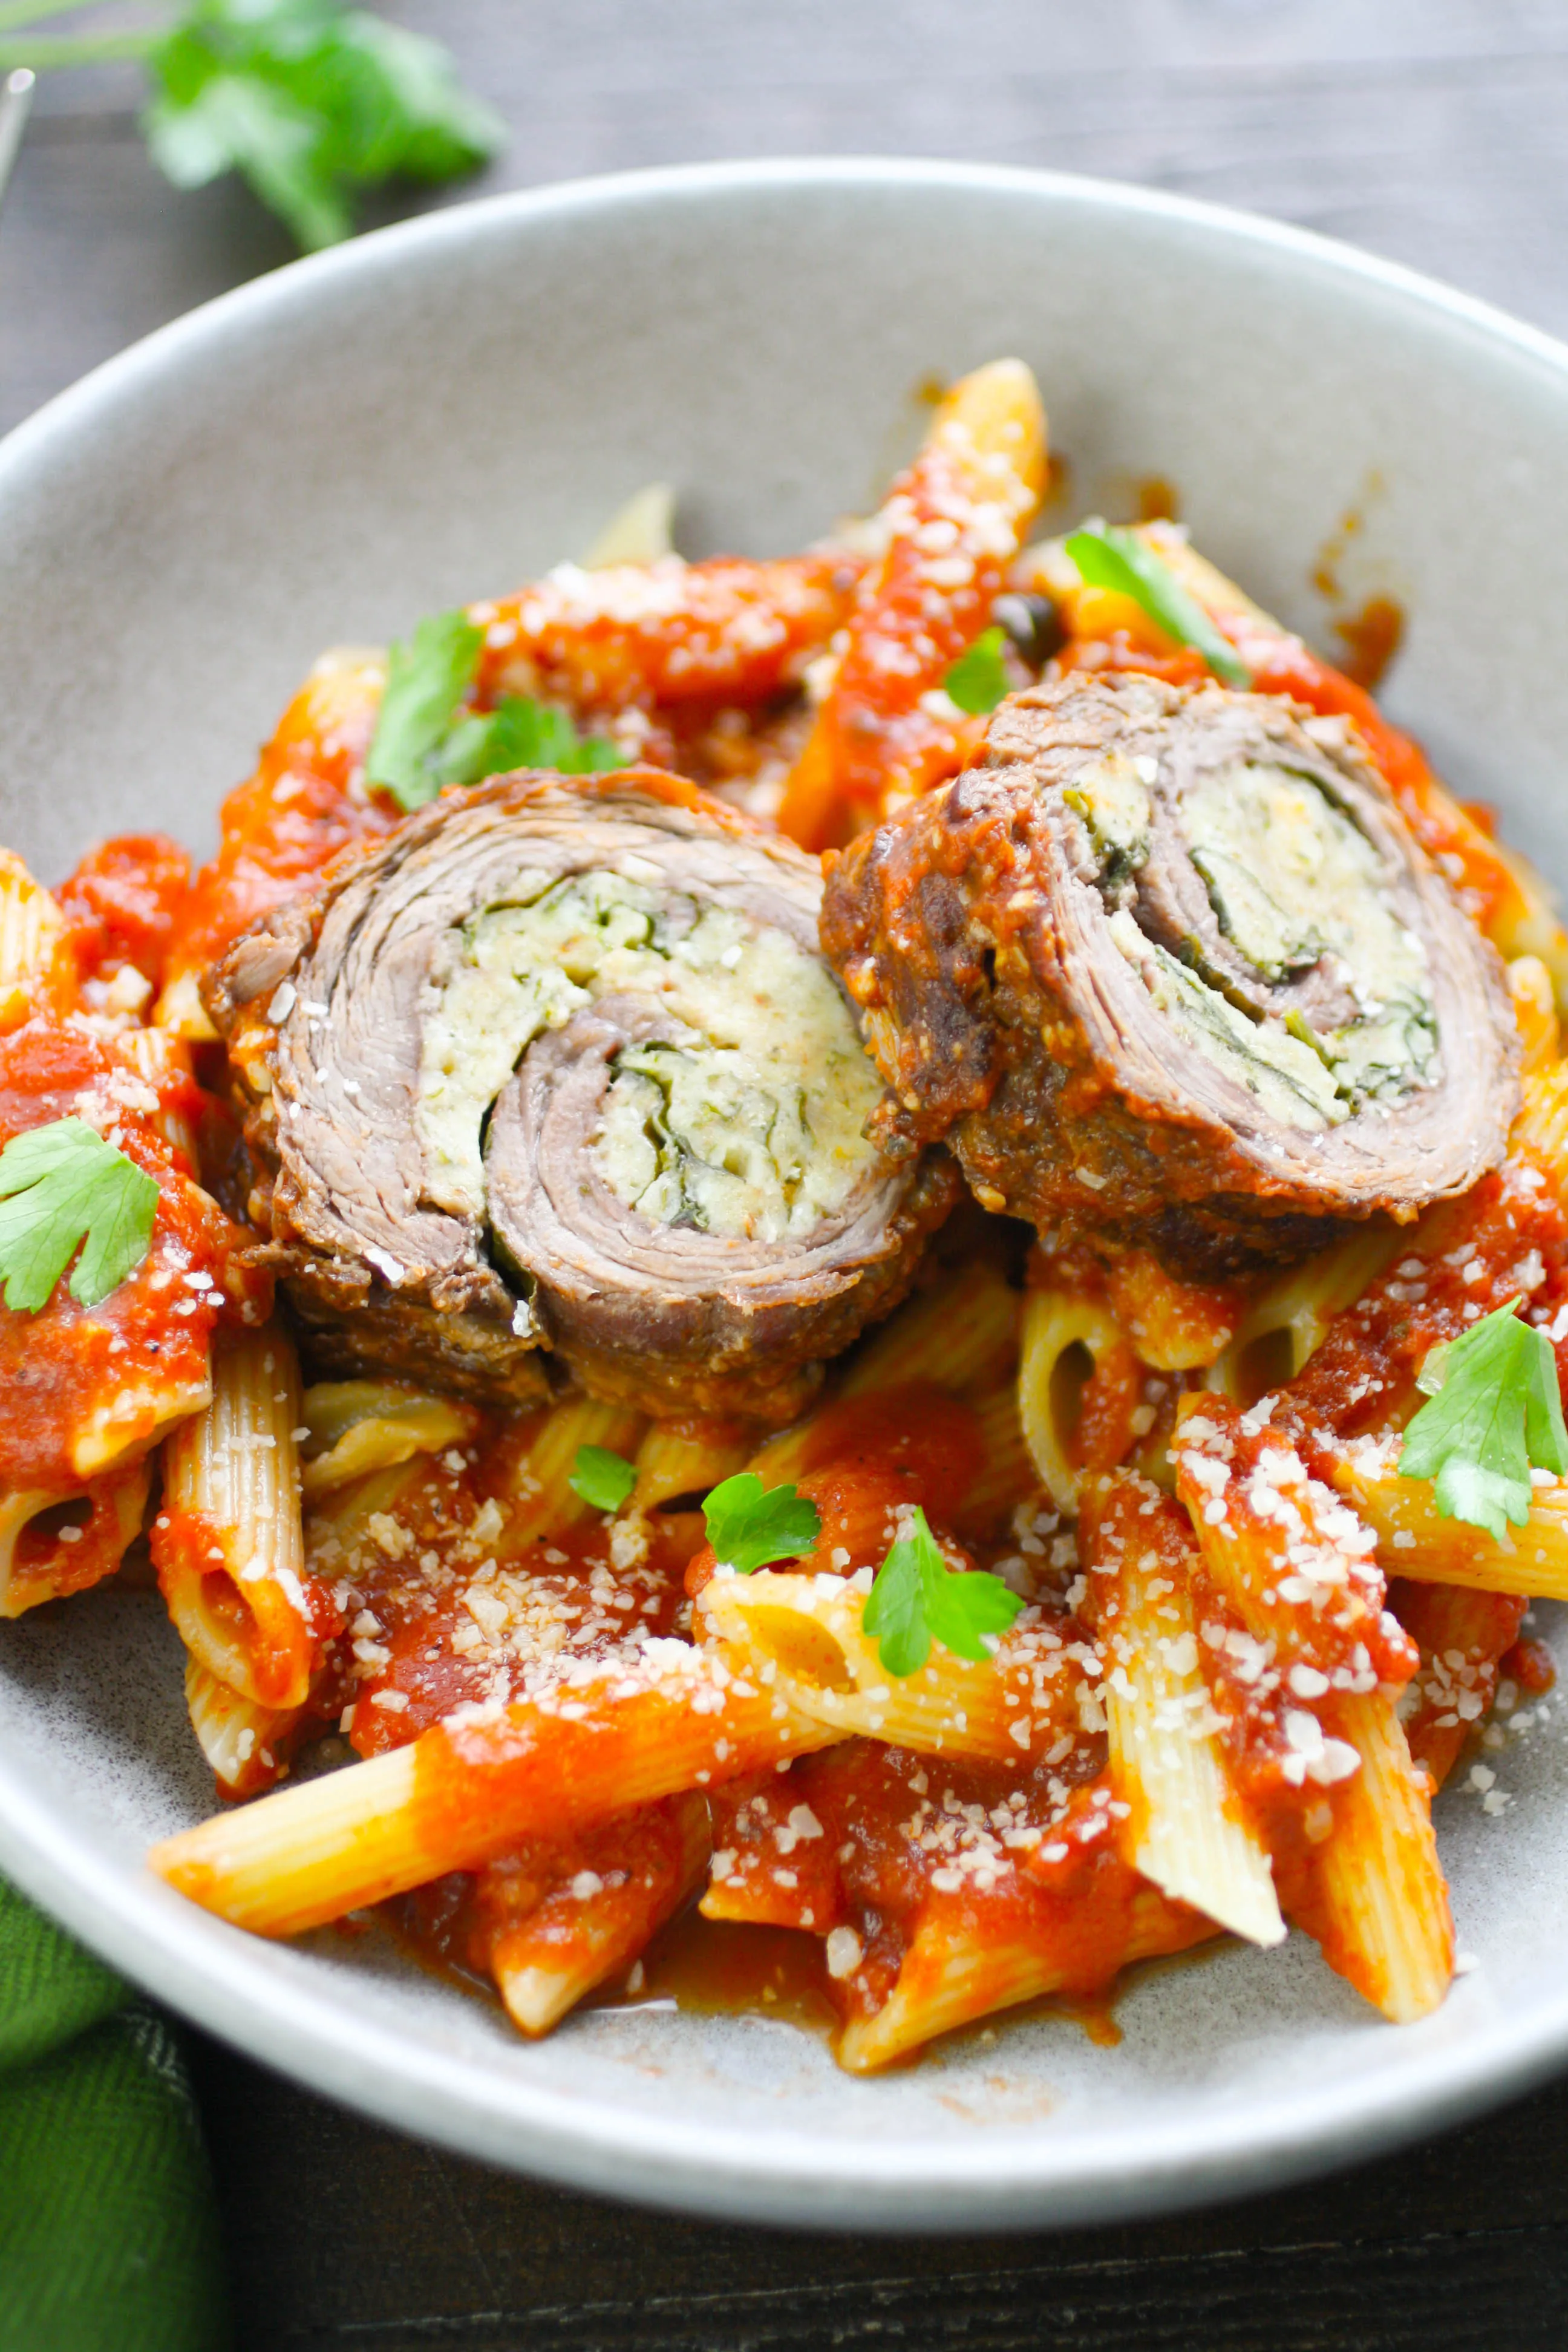 Beef Braciole is a classic that is perfect for your next special dish. Beef Braciole should be on your to-make list!